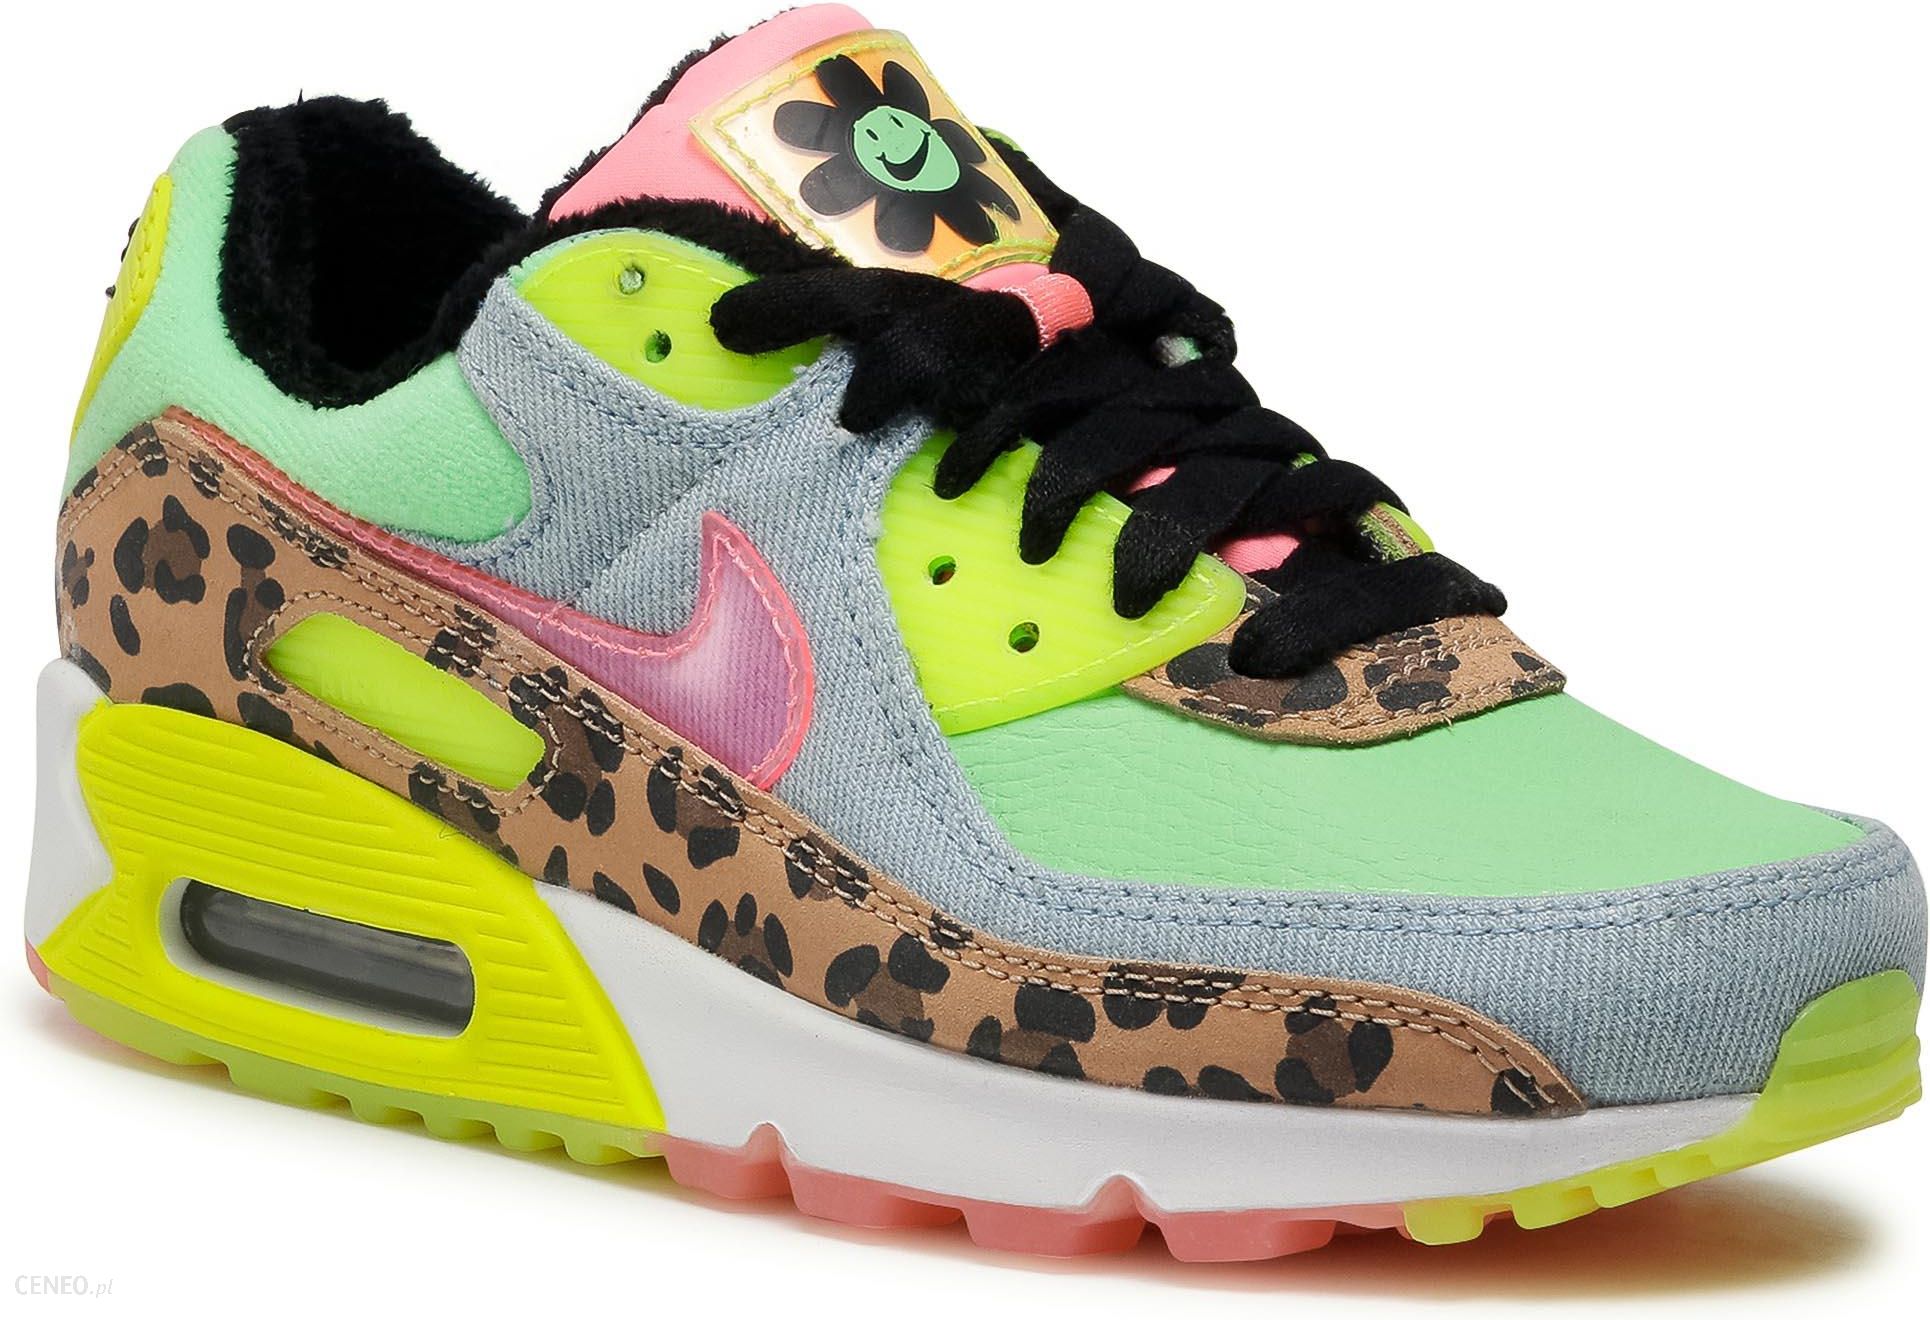 Buty Nike Air Max 90 Lx Cw3499 300 Illusion Green Sunset Pulse Ceny I Opinie Ceneo Pl